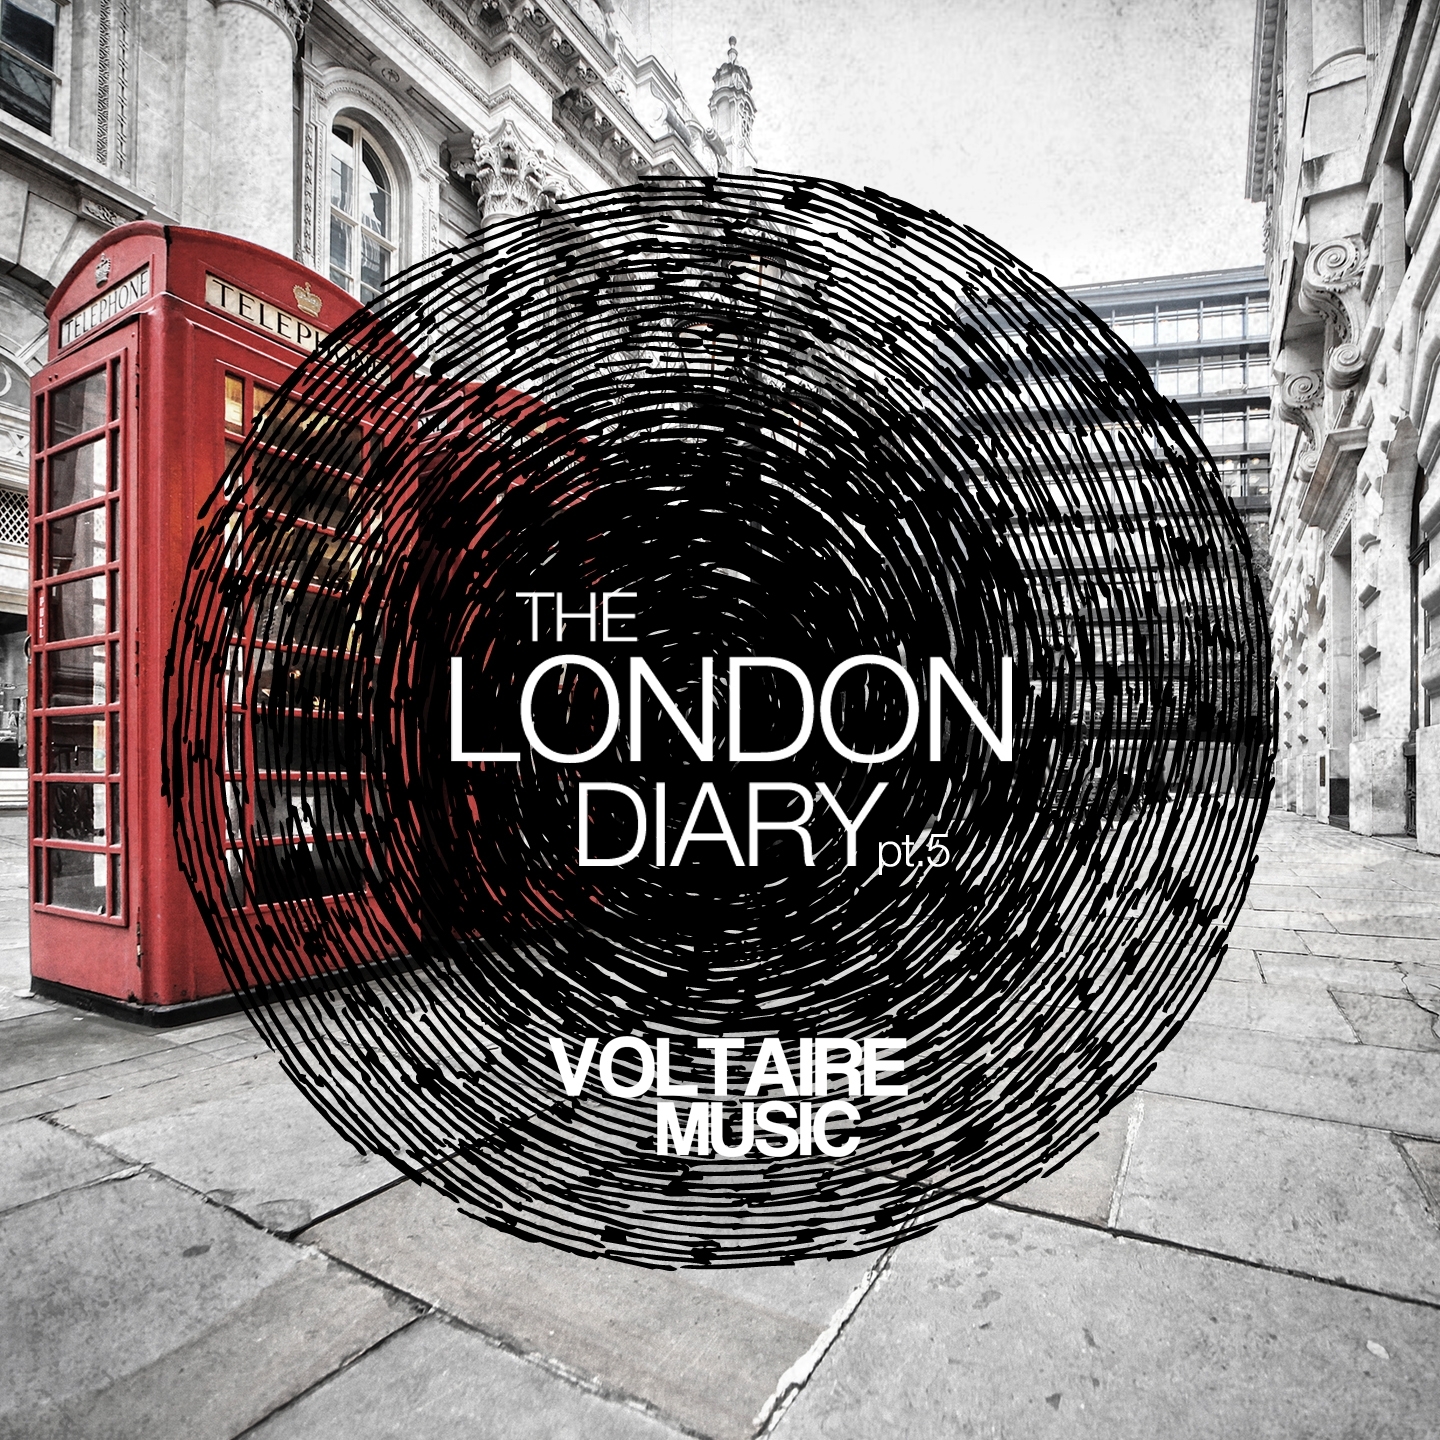 Voltaire Music pres. The London Diary, Pt. 5